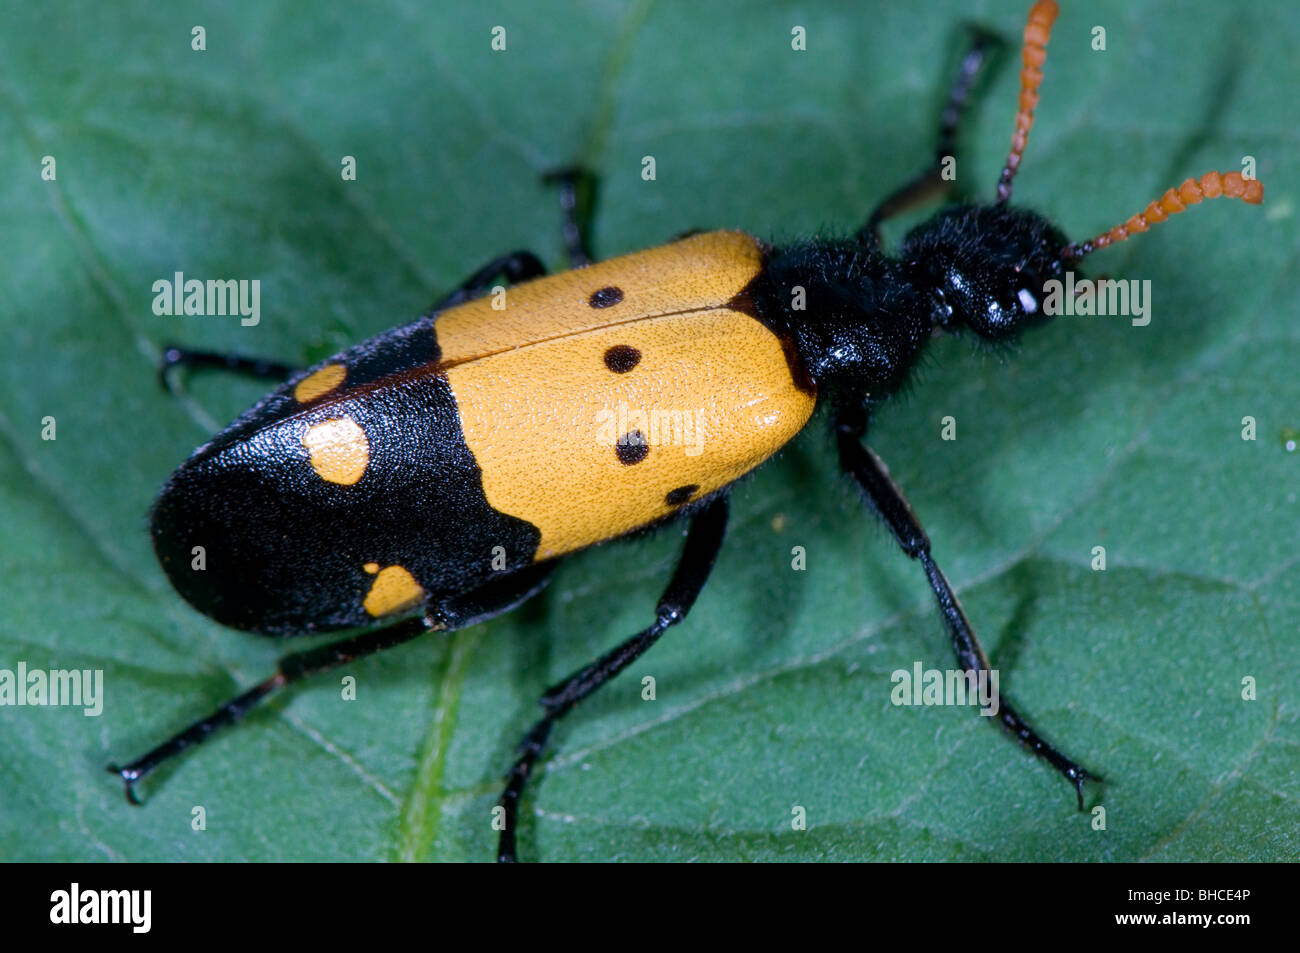 Blister beetle, family Meloidae, photographed in Tanzania, Africa. Stock Photo